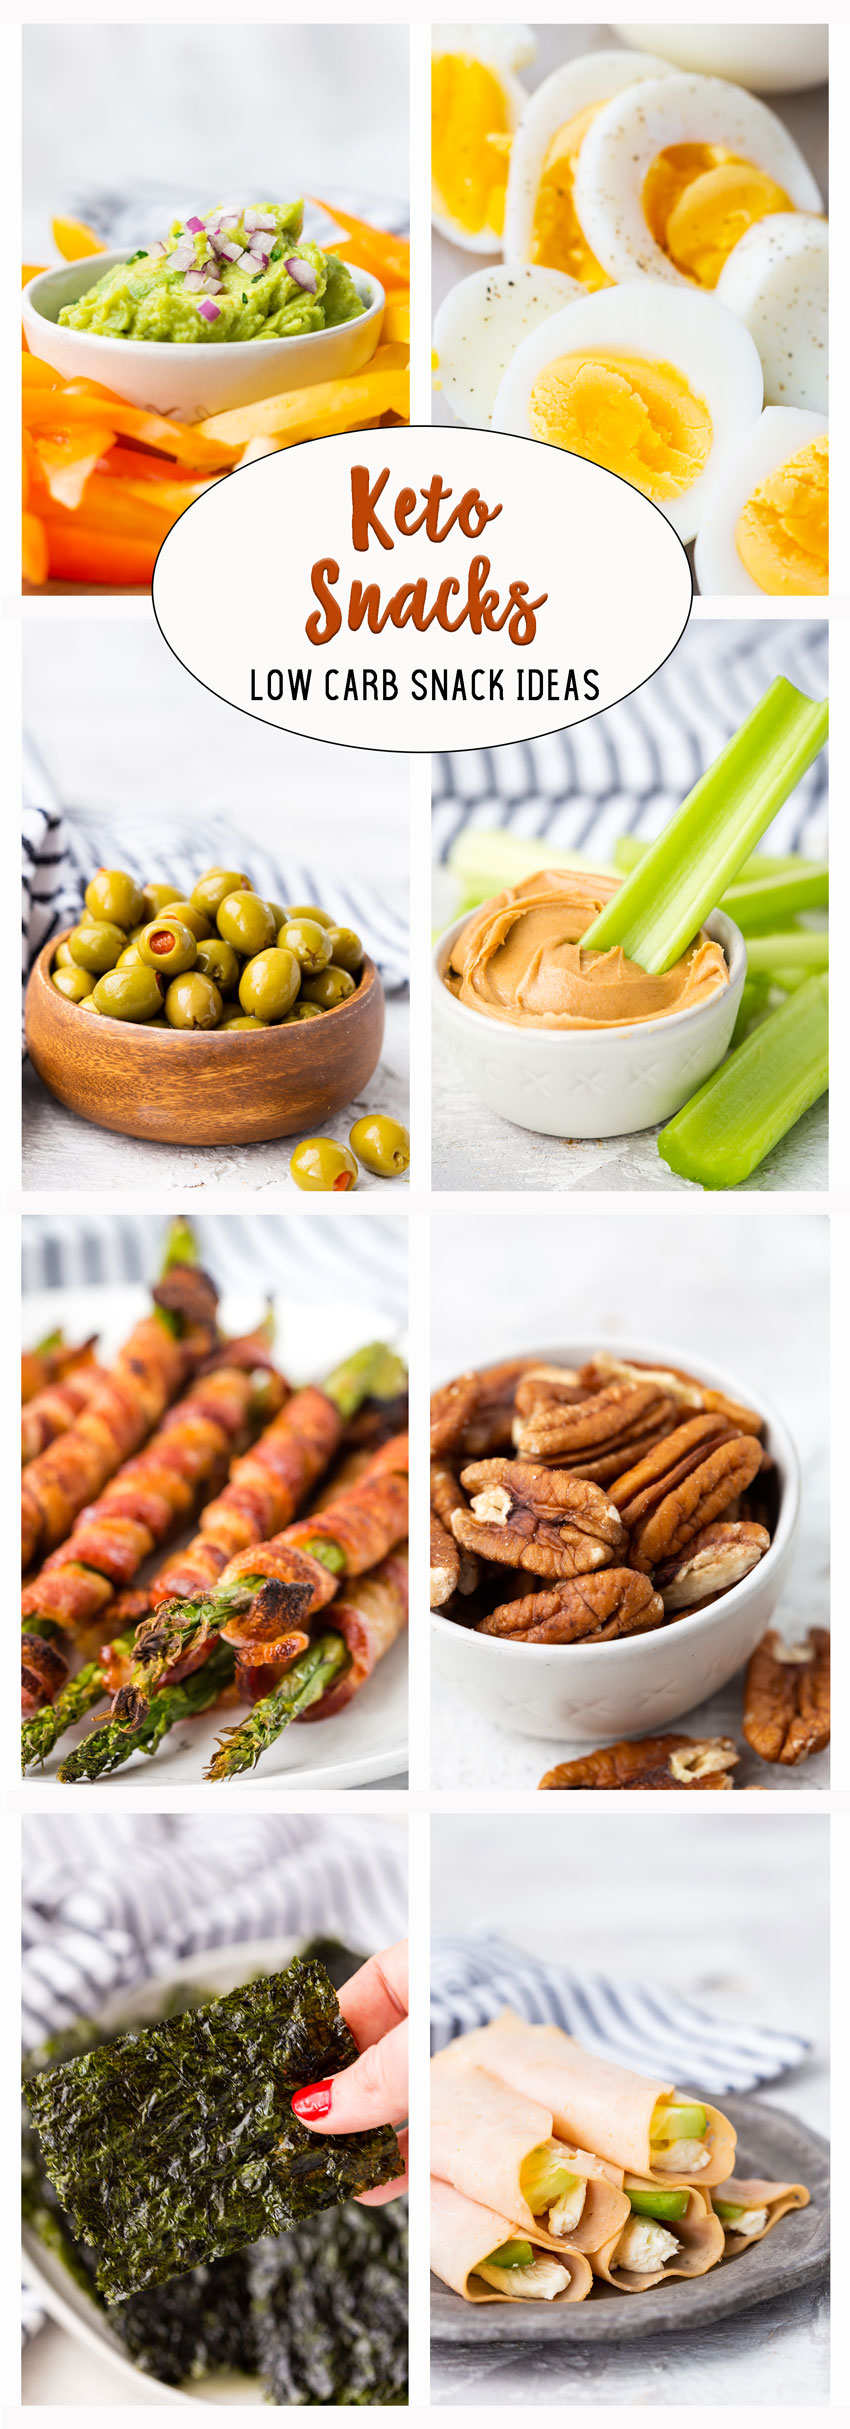 The best tasty low carb snack ideas for keto diet